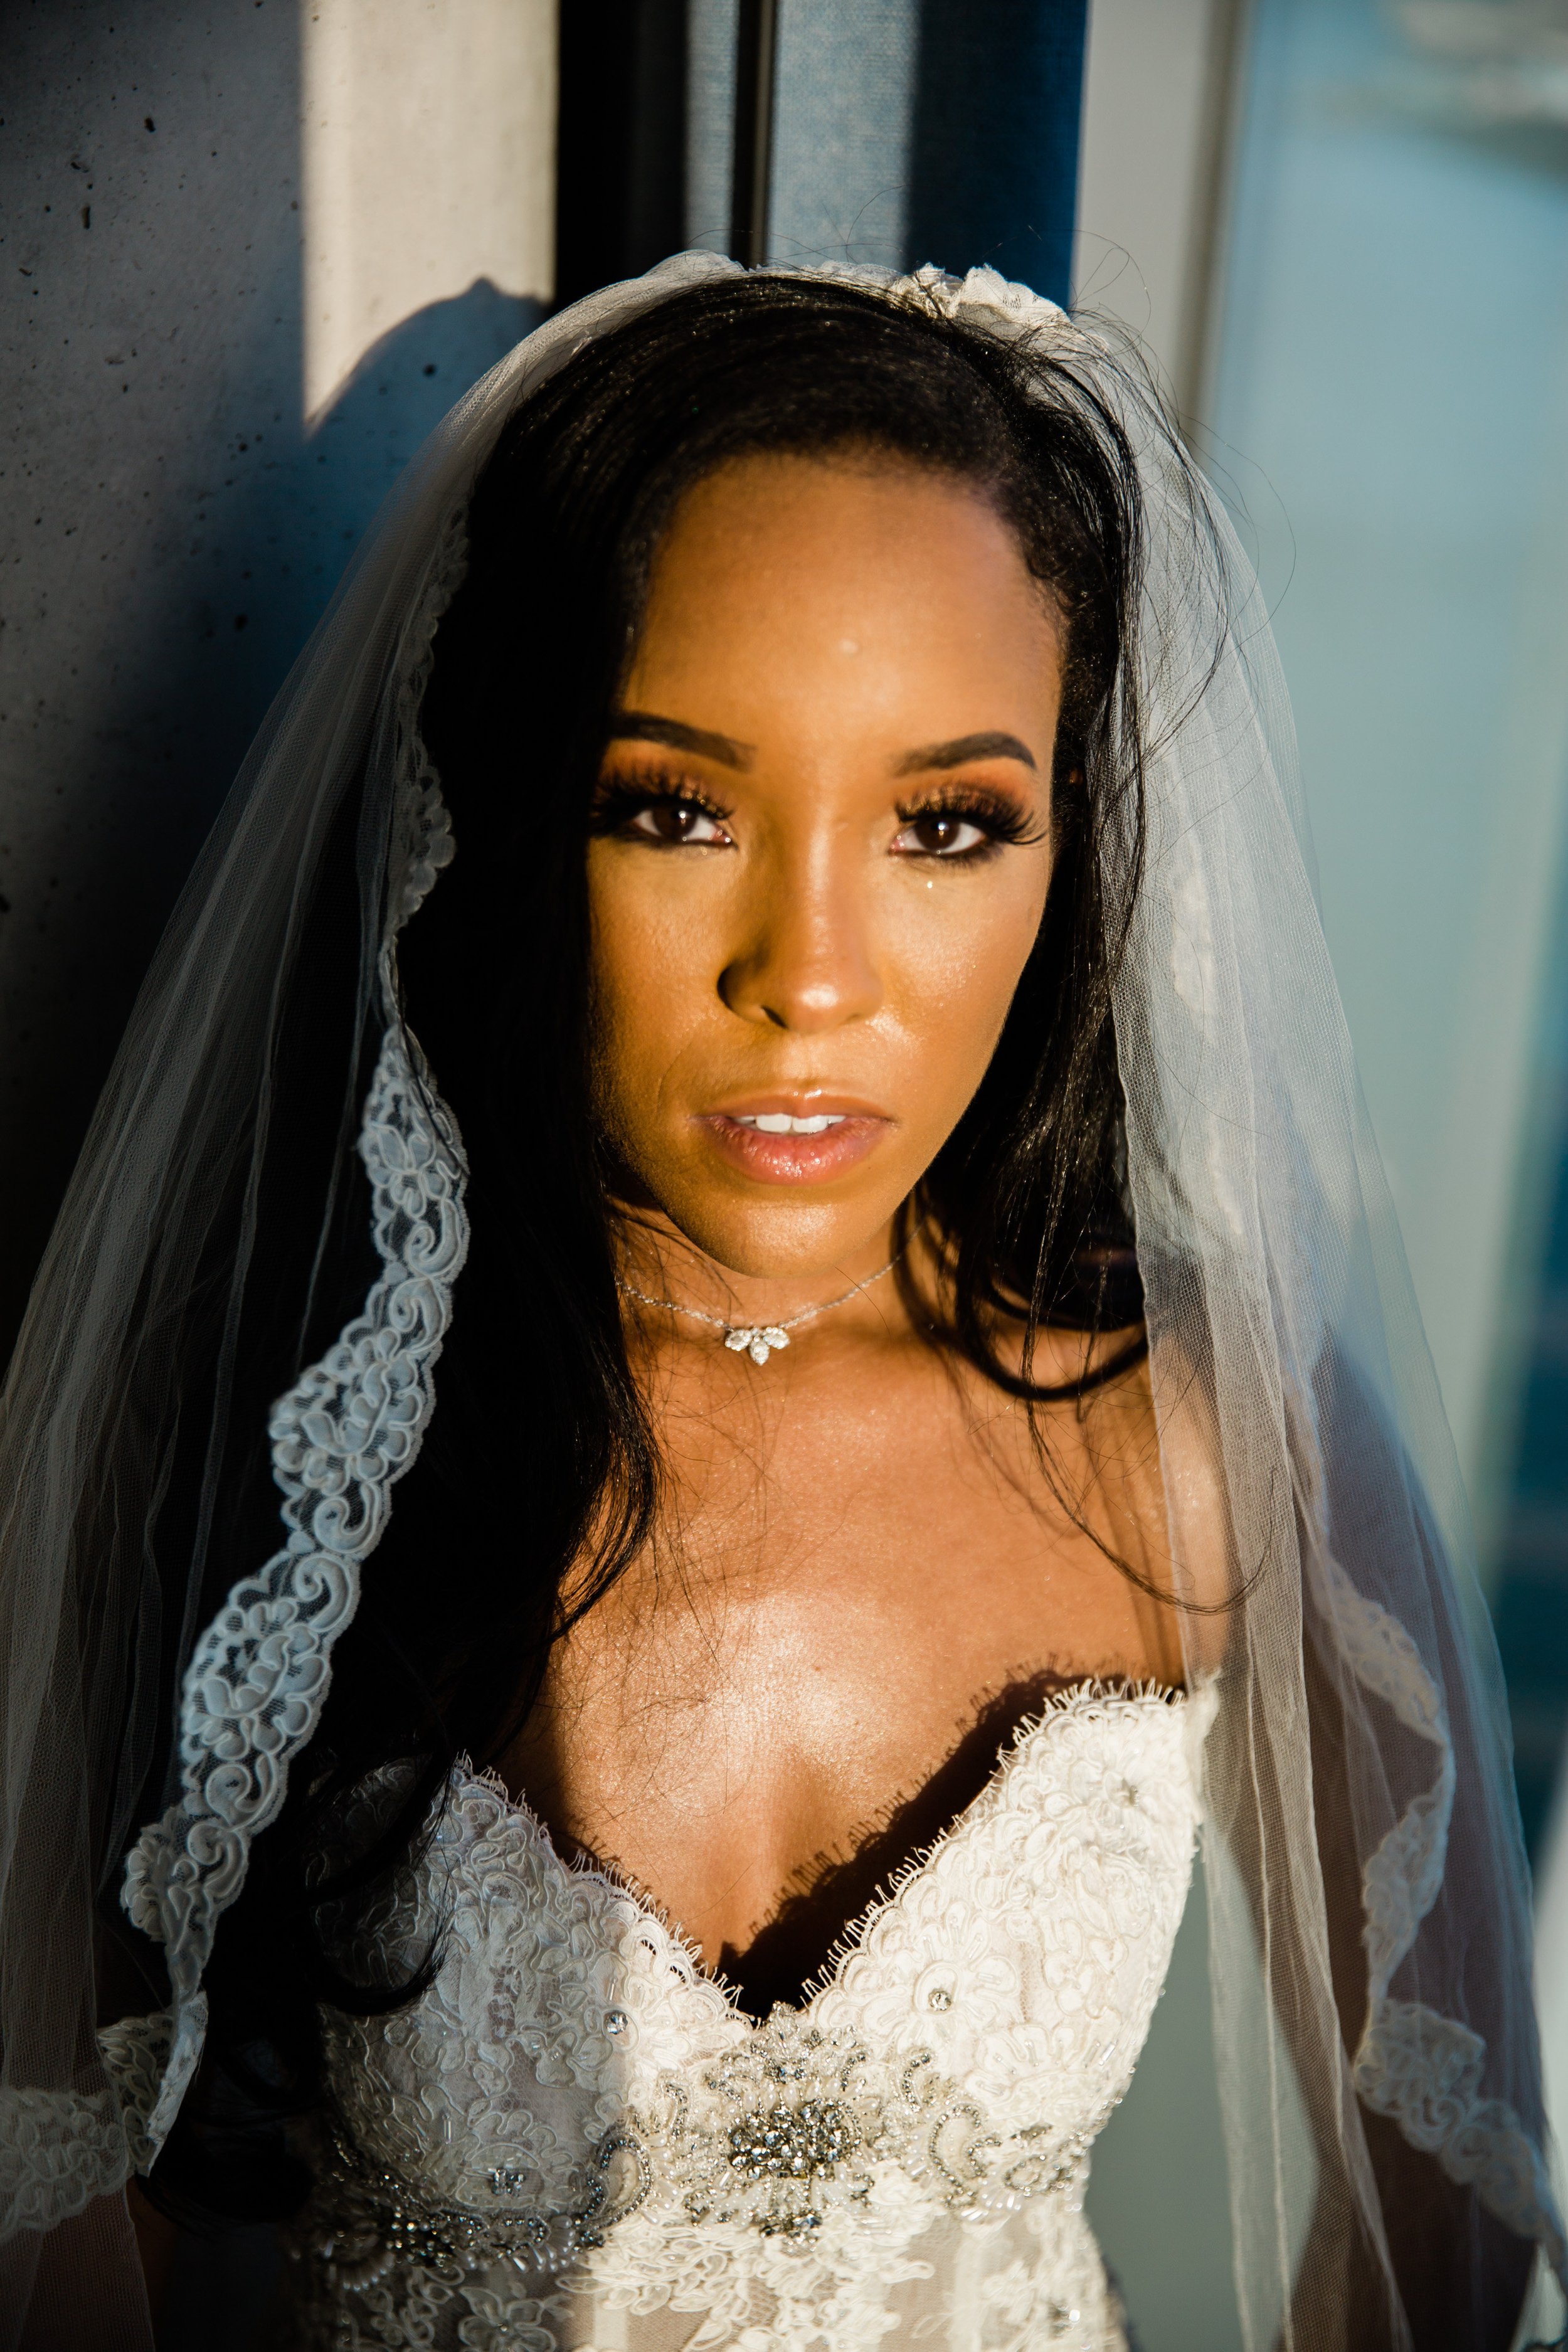 Black bride with lace trimmed veil staring